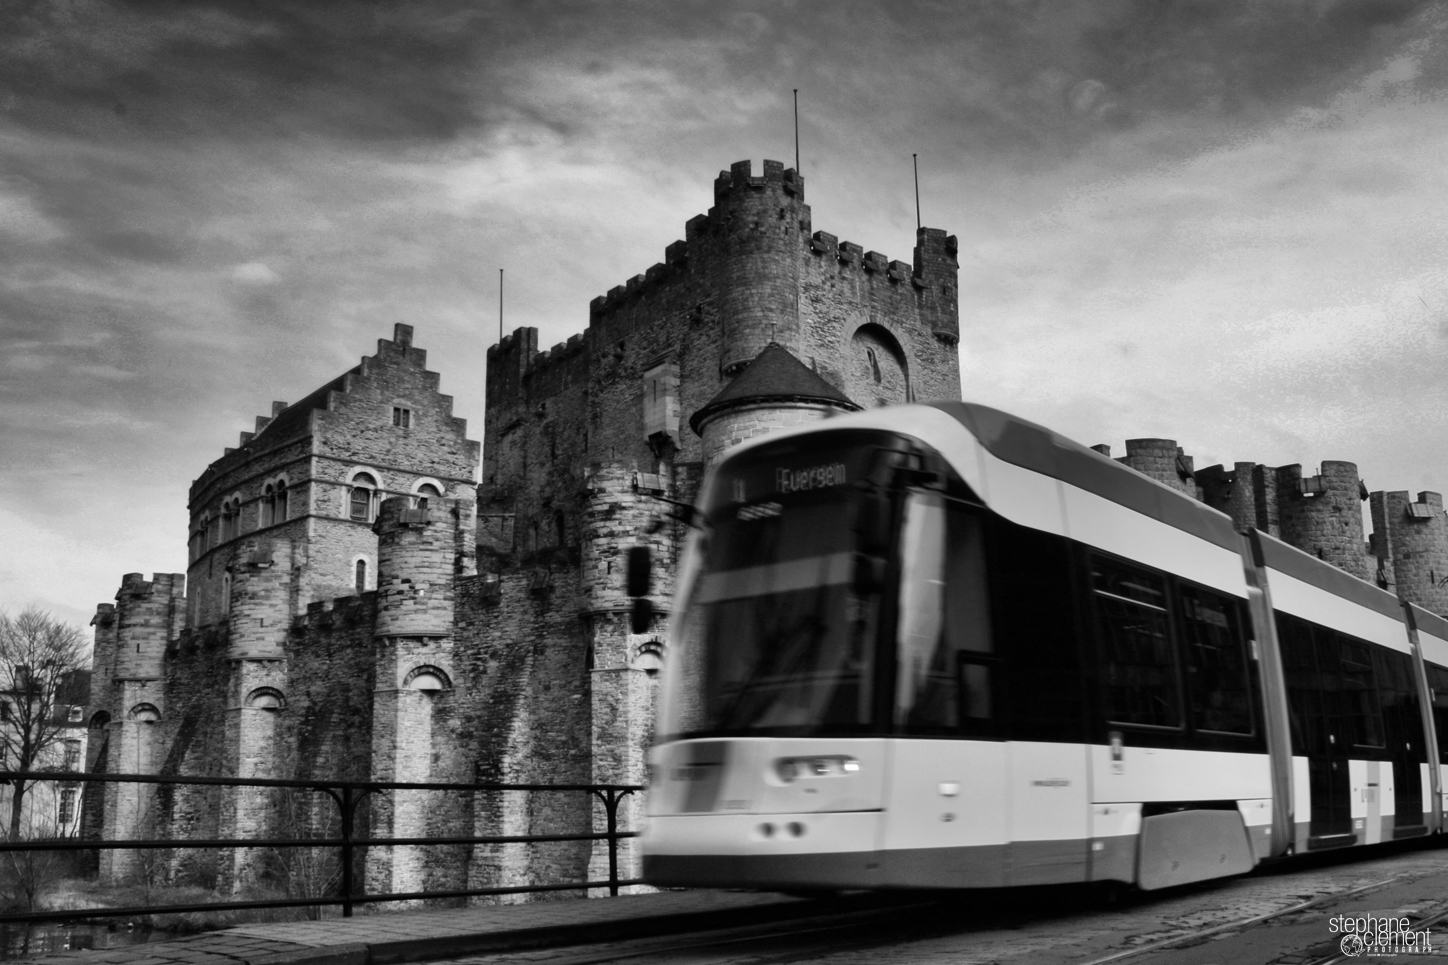 Pic/photo about Gant/Gent (Belgium) : tramway with cattle, pic in black and white.